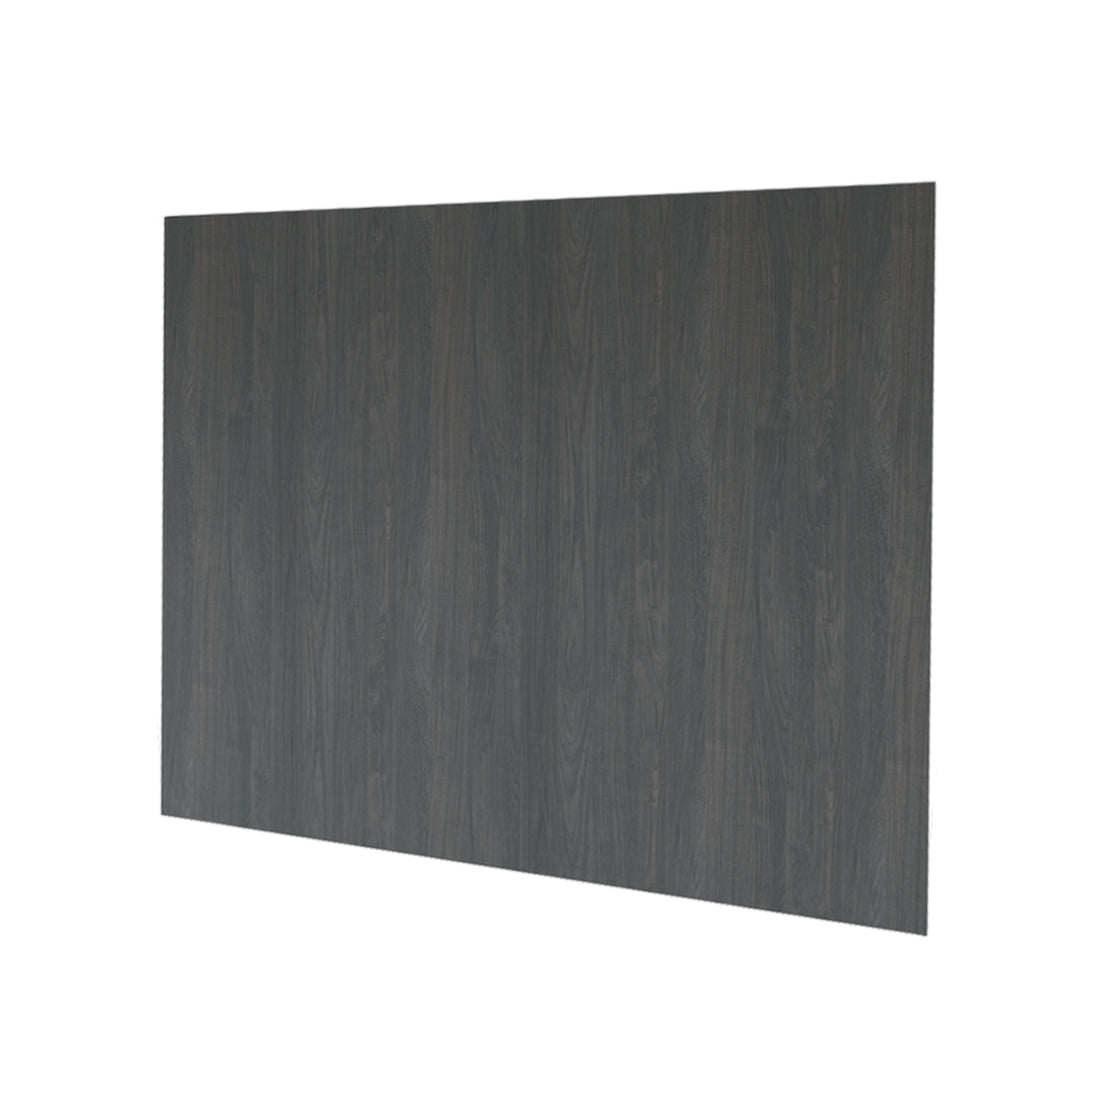 Carbon Marine Slab Style Kitchen Cabinet Island End Panel (36 in W x 0.75 in D x 48 in H) -  Pro-Edge HD